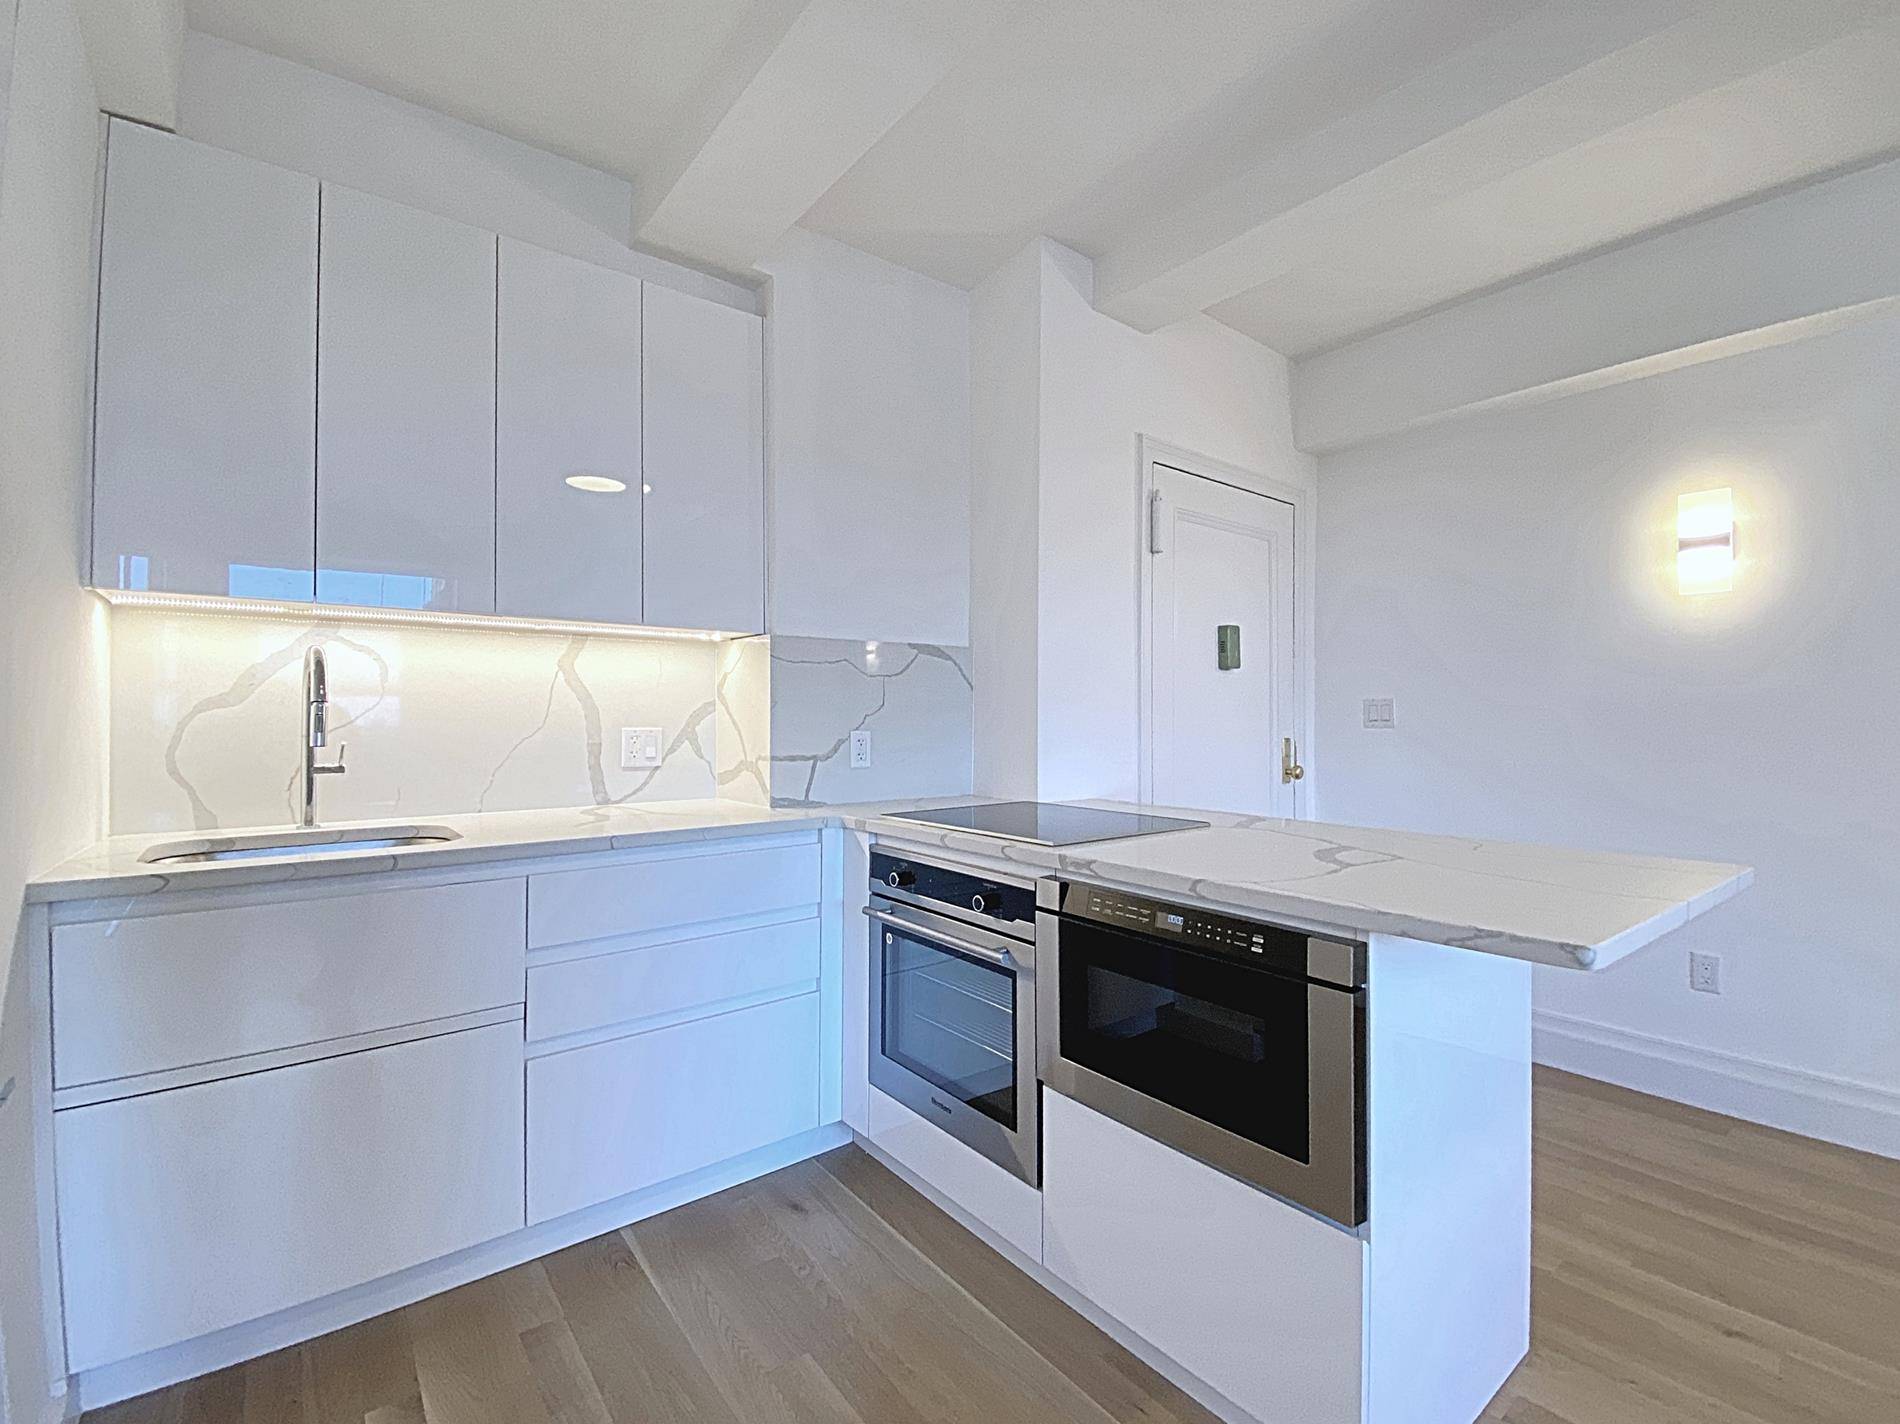 Turn Key SPONSOR UNIT NO BOARD APPROVAL REQUIREDOld world elegance with interior new construction fitted for modern living best describes this meticulously designed one bedroom in the famed Chelsea Court.